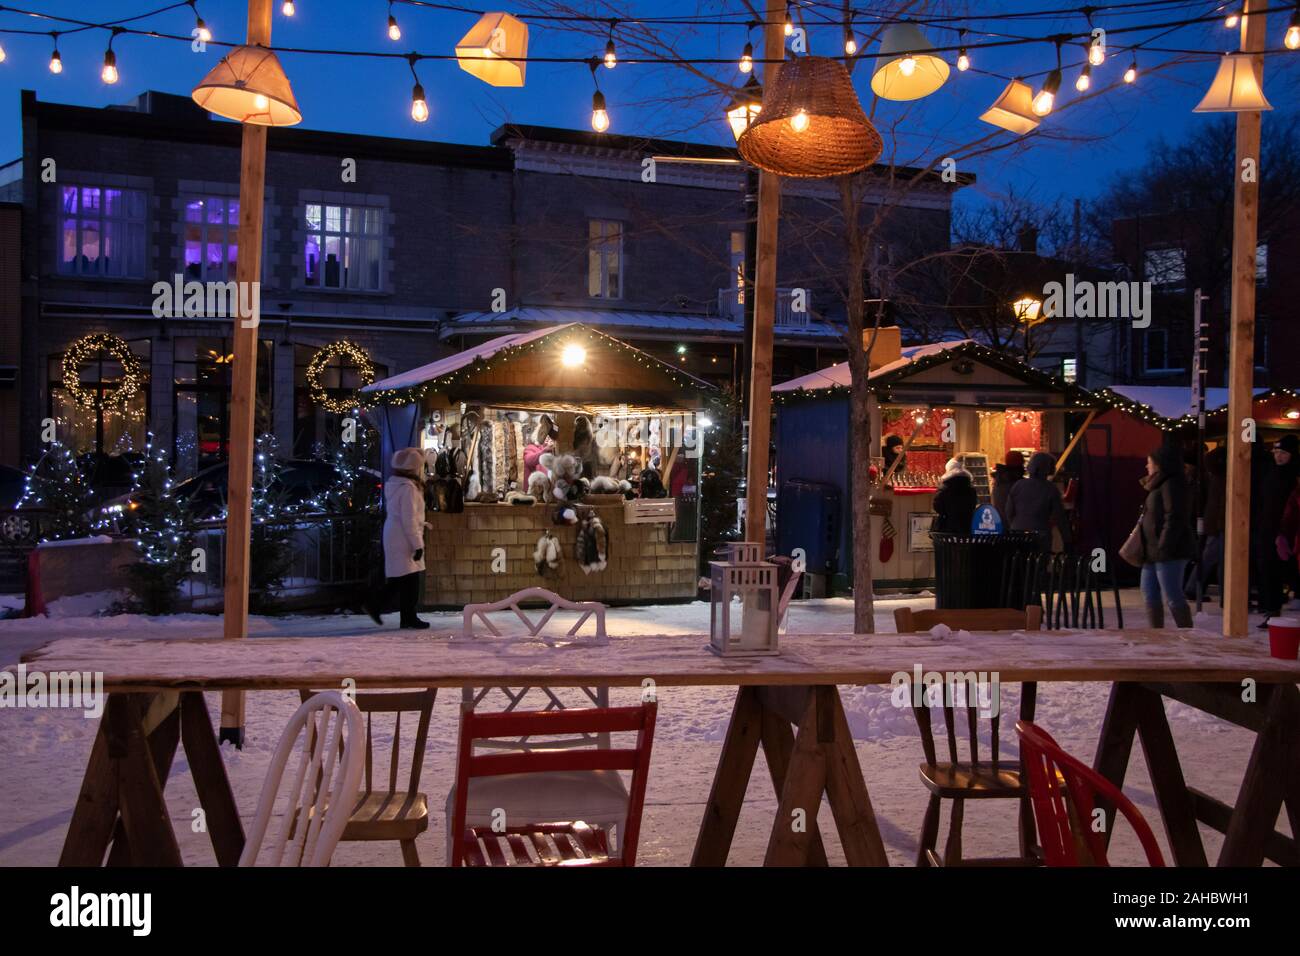 Longueuil, Québec, Canada - December, 7, 2019: Vendor Stands, antique chairs and table, String Lights Lamp Shades, Longueuil Christmas Market at night Stock Photo